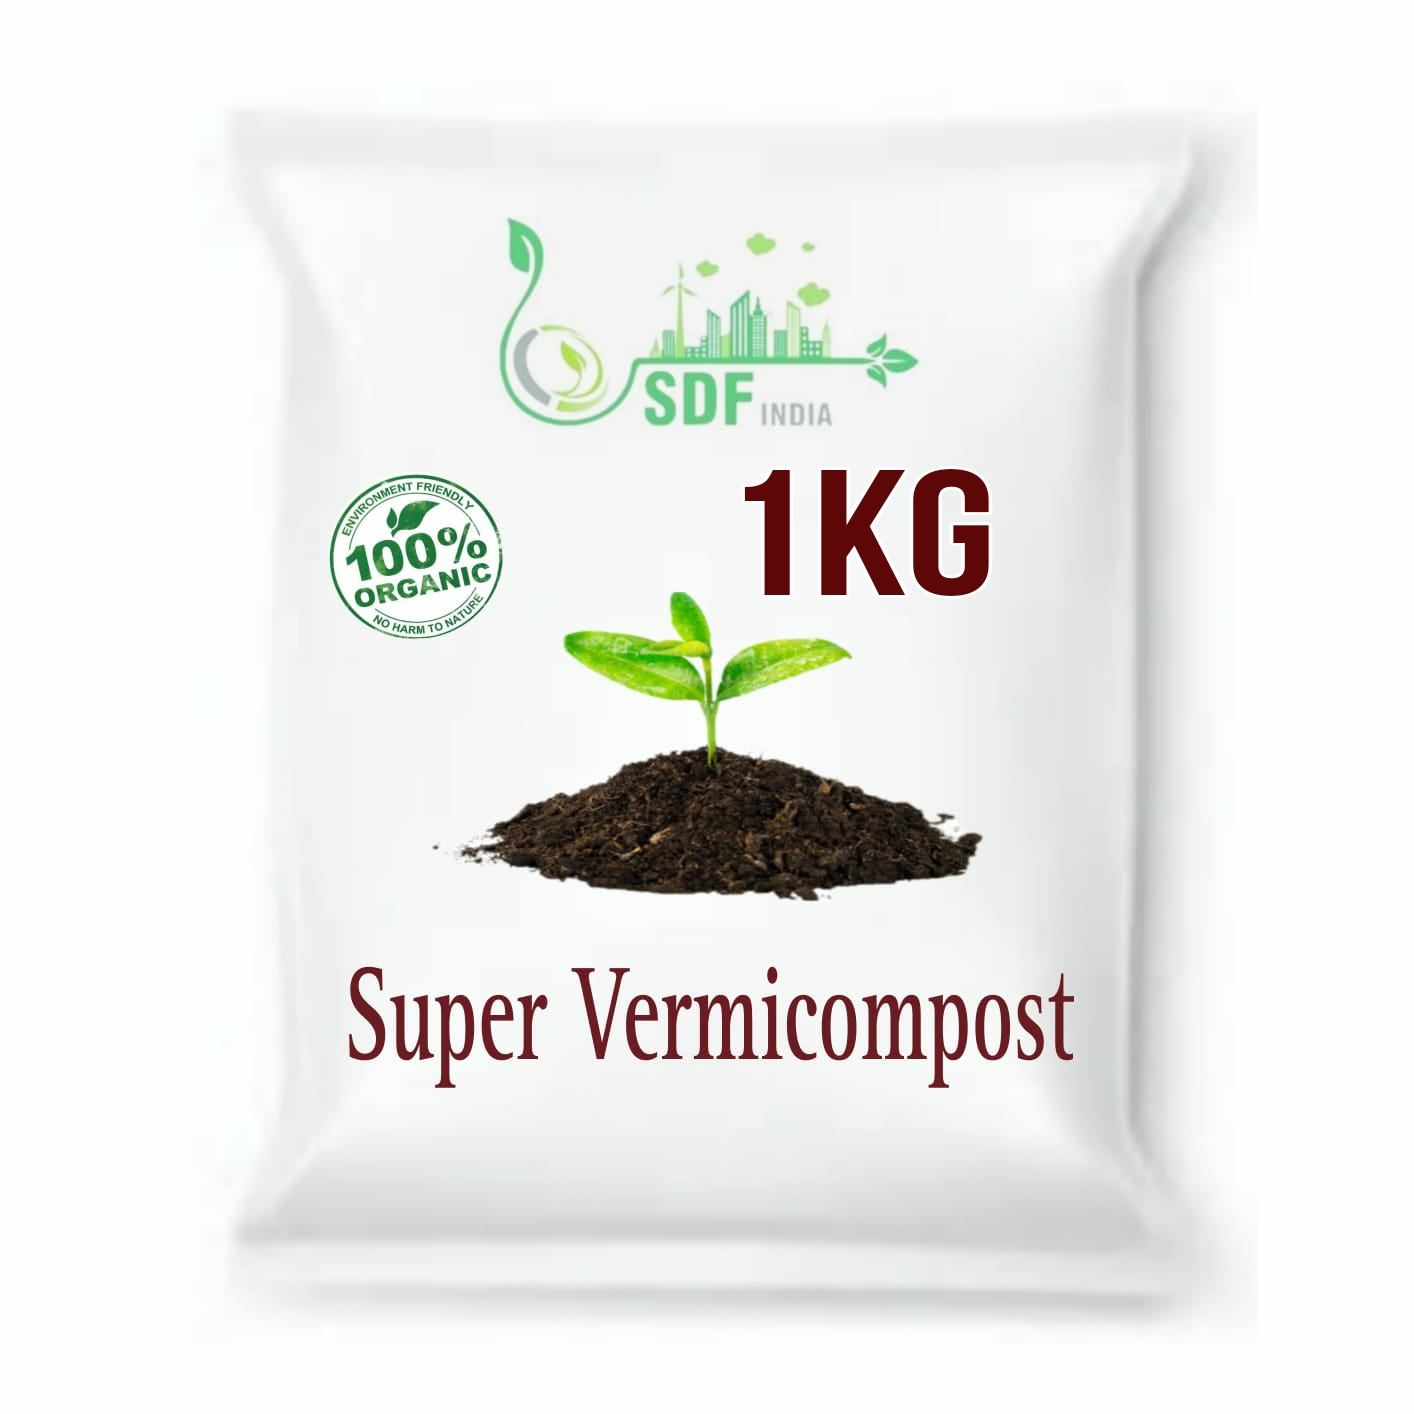 SDF India Super Vermicompost for All Kinds of Plants Complete Food for The Soil, Enriched with, Organic (1 KG)